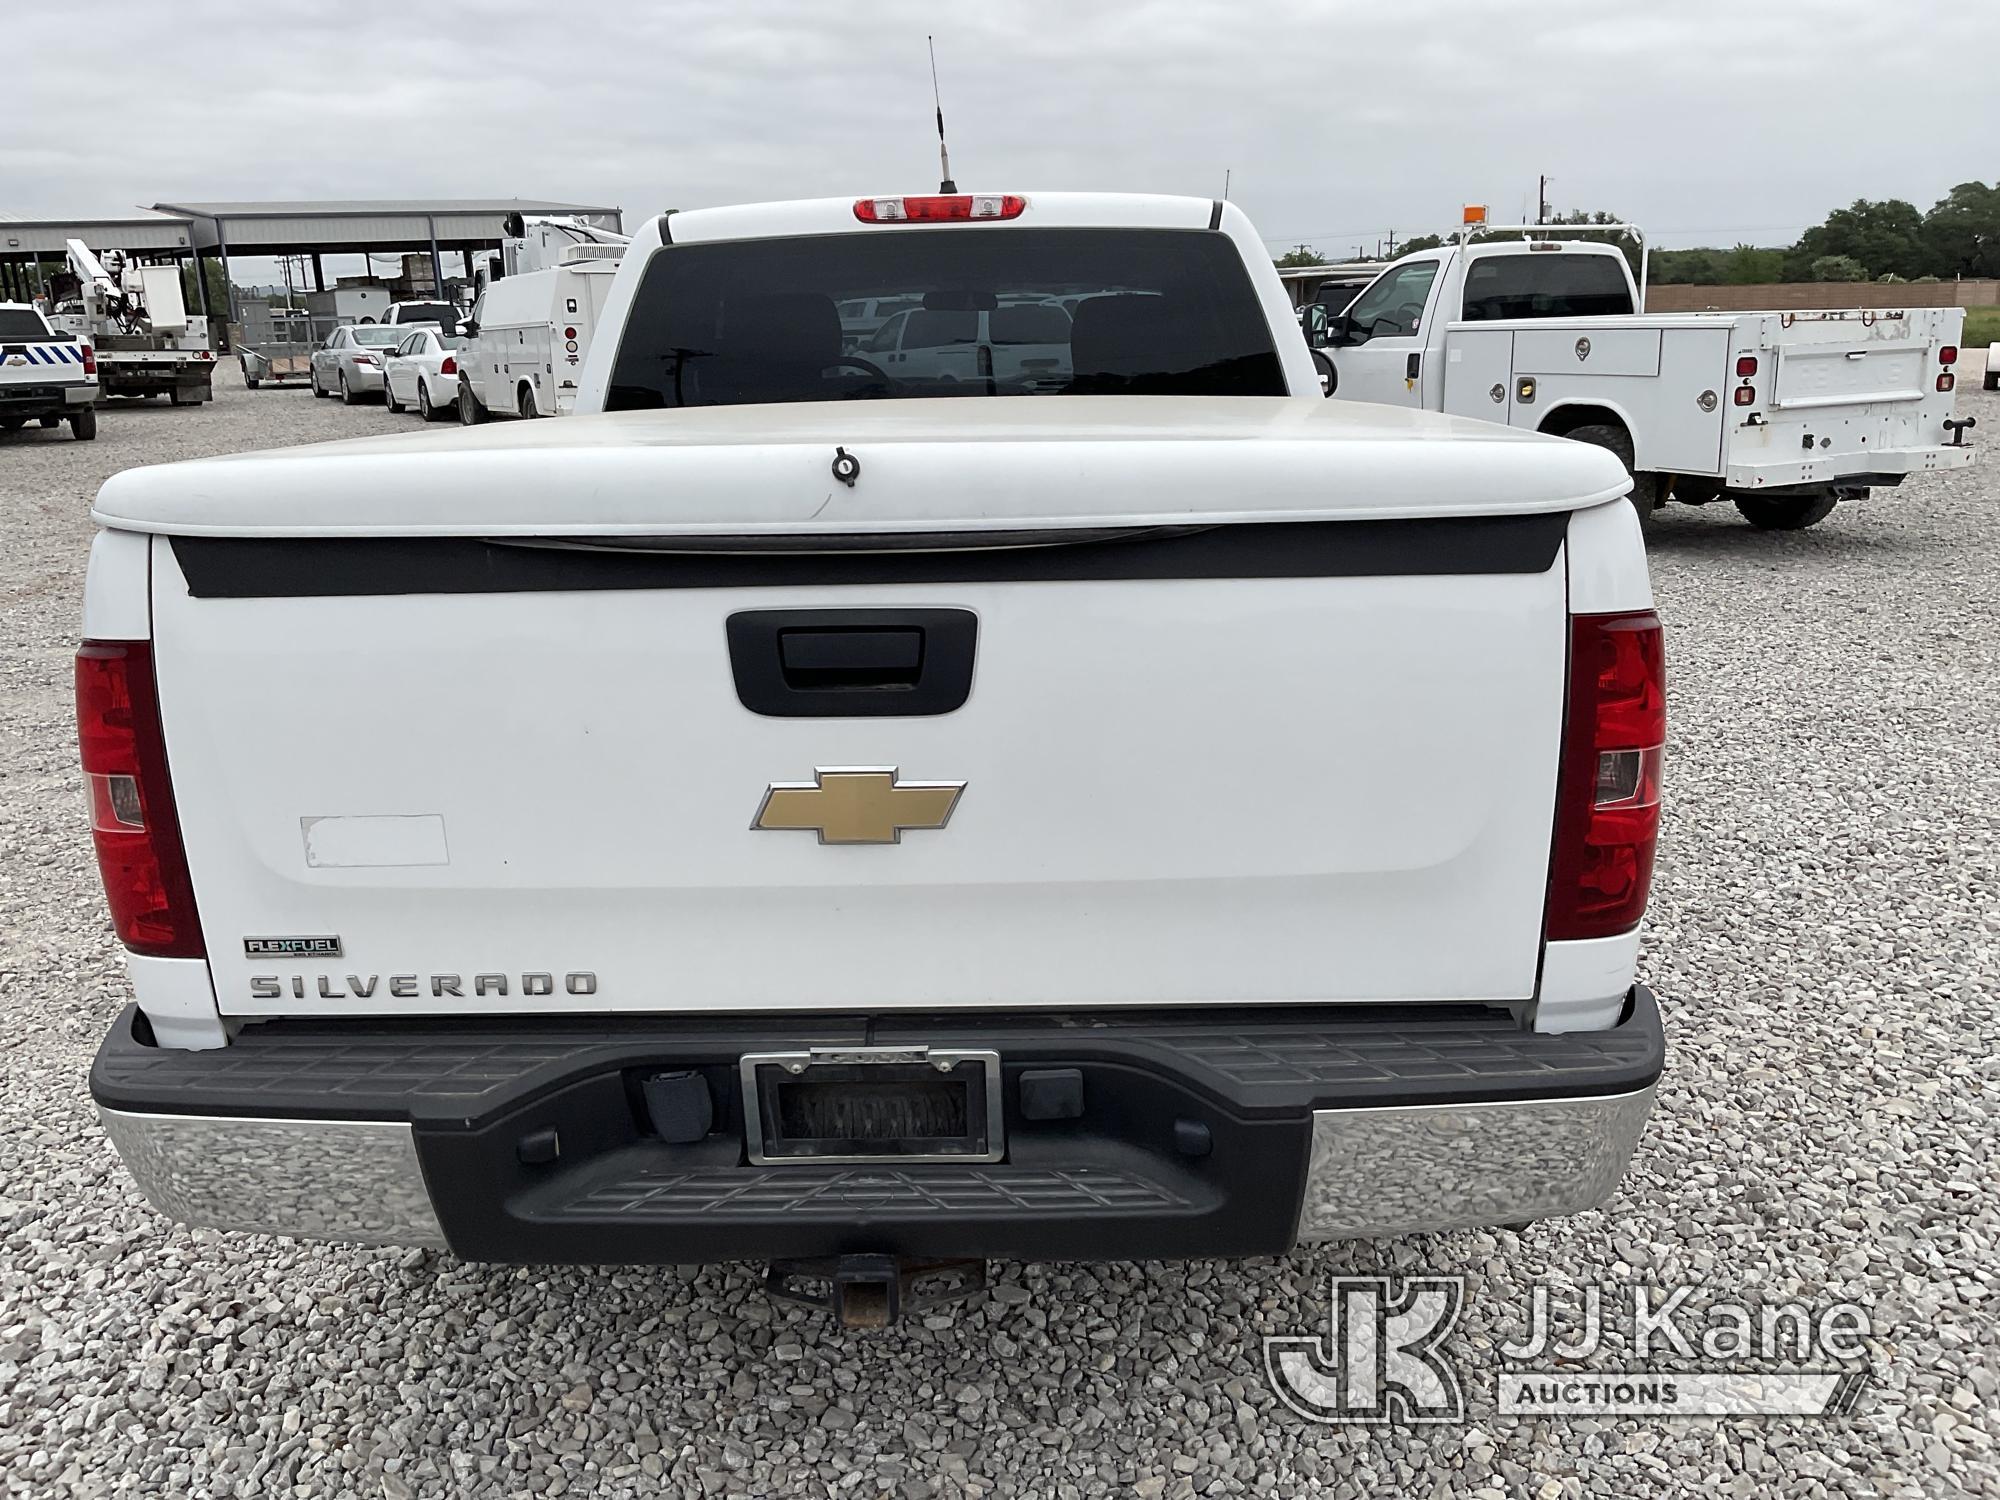 (Johnson City, TX) 2011 Chevrolet Silverado 1500 4x4 Extended-Cab Pickup Truck, , Cooperative owned